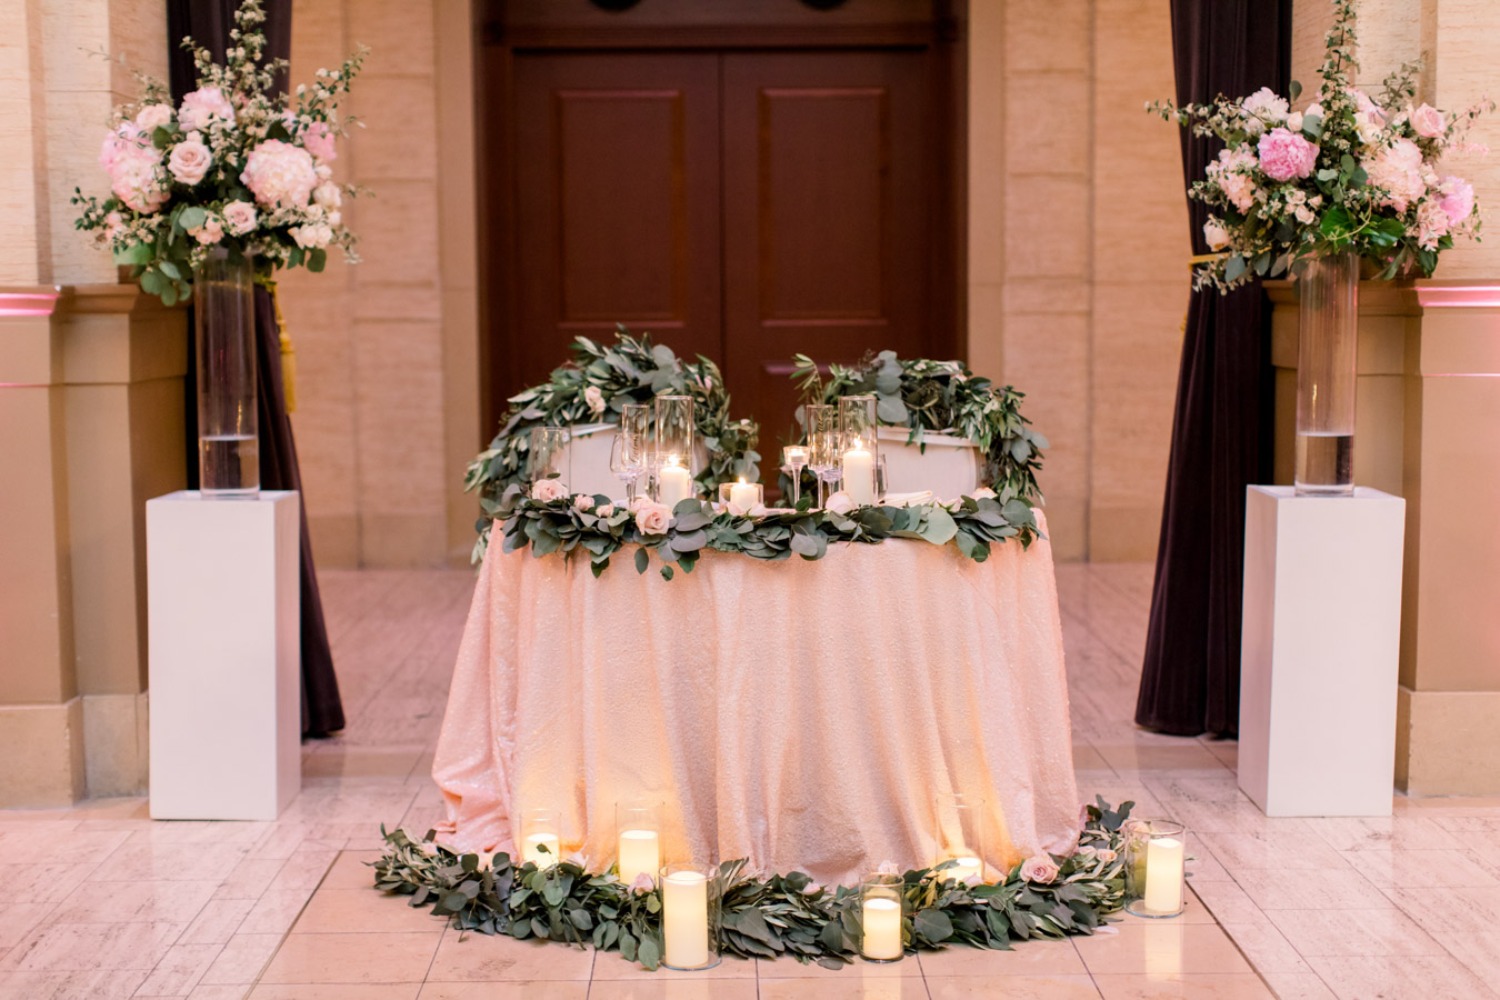 Sweetheart table with candles